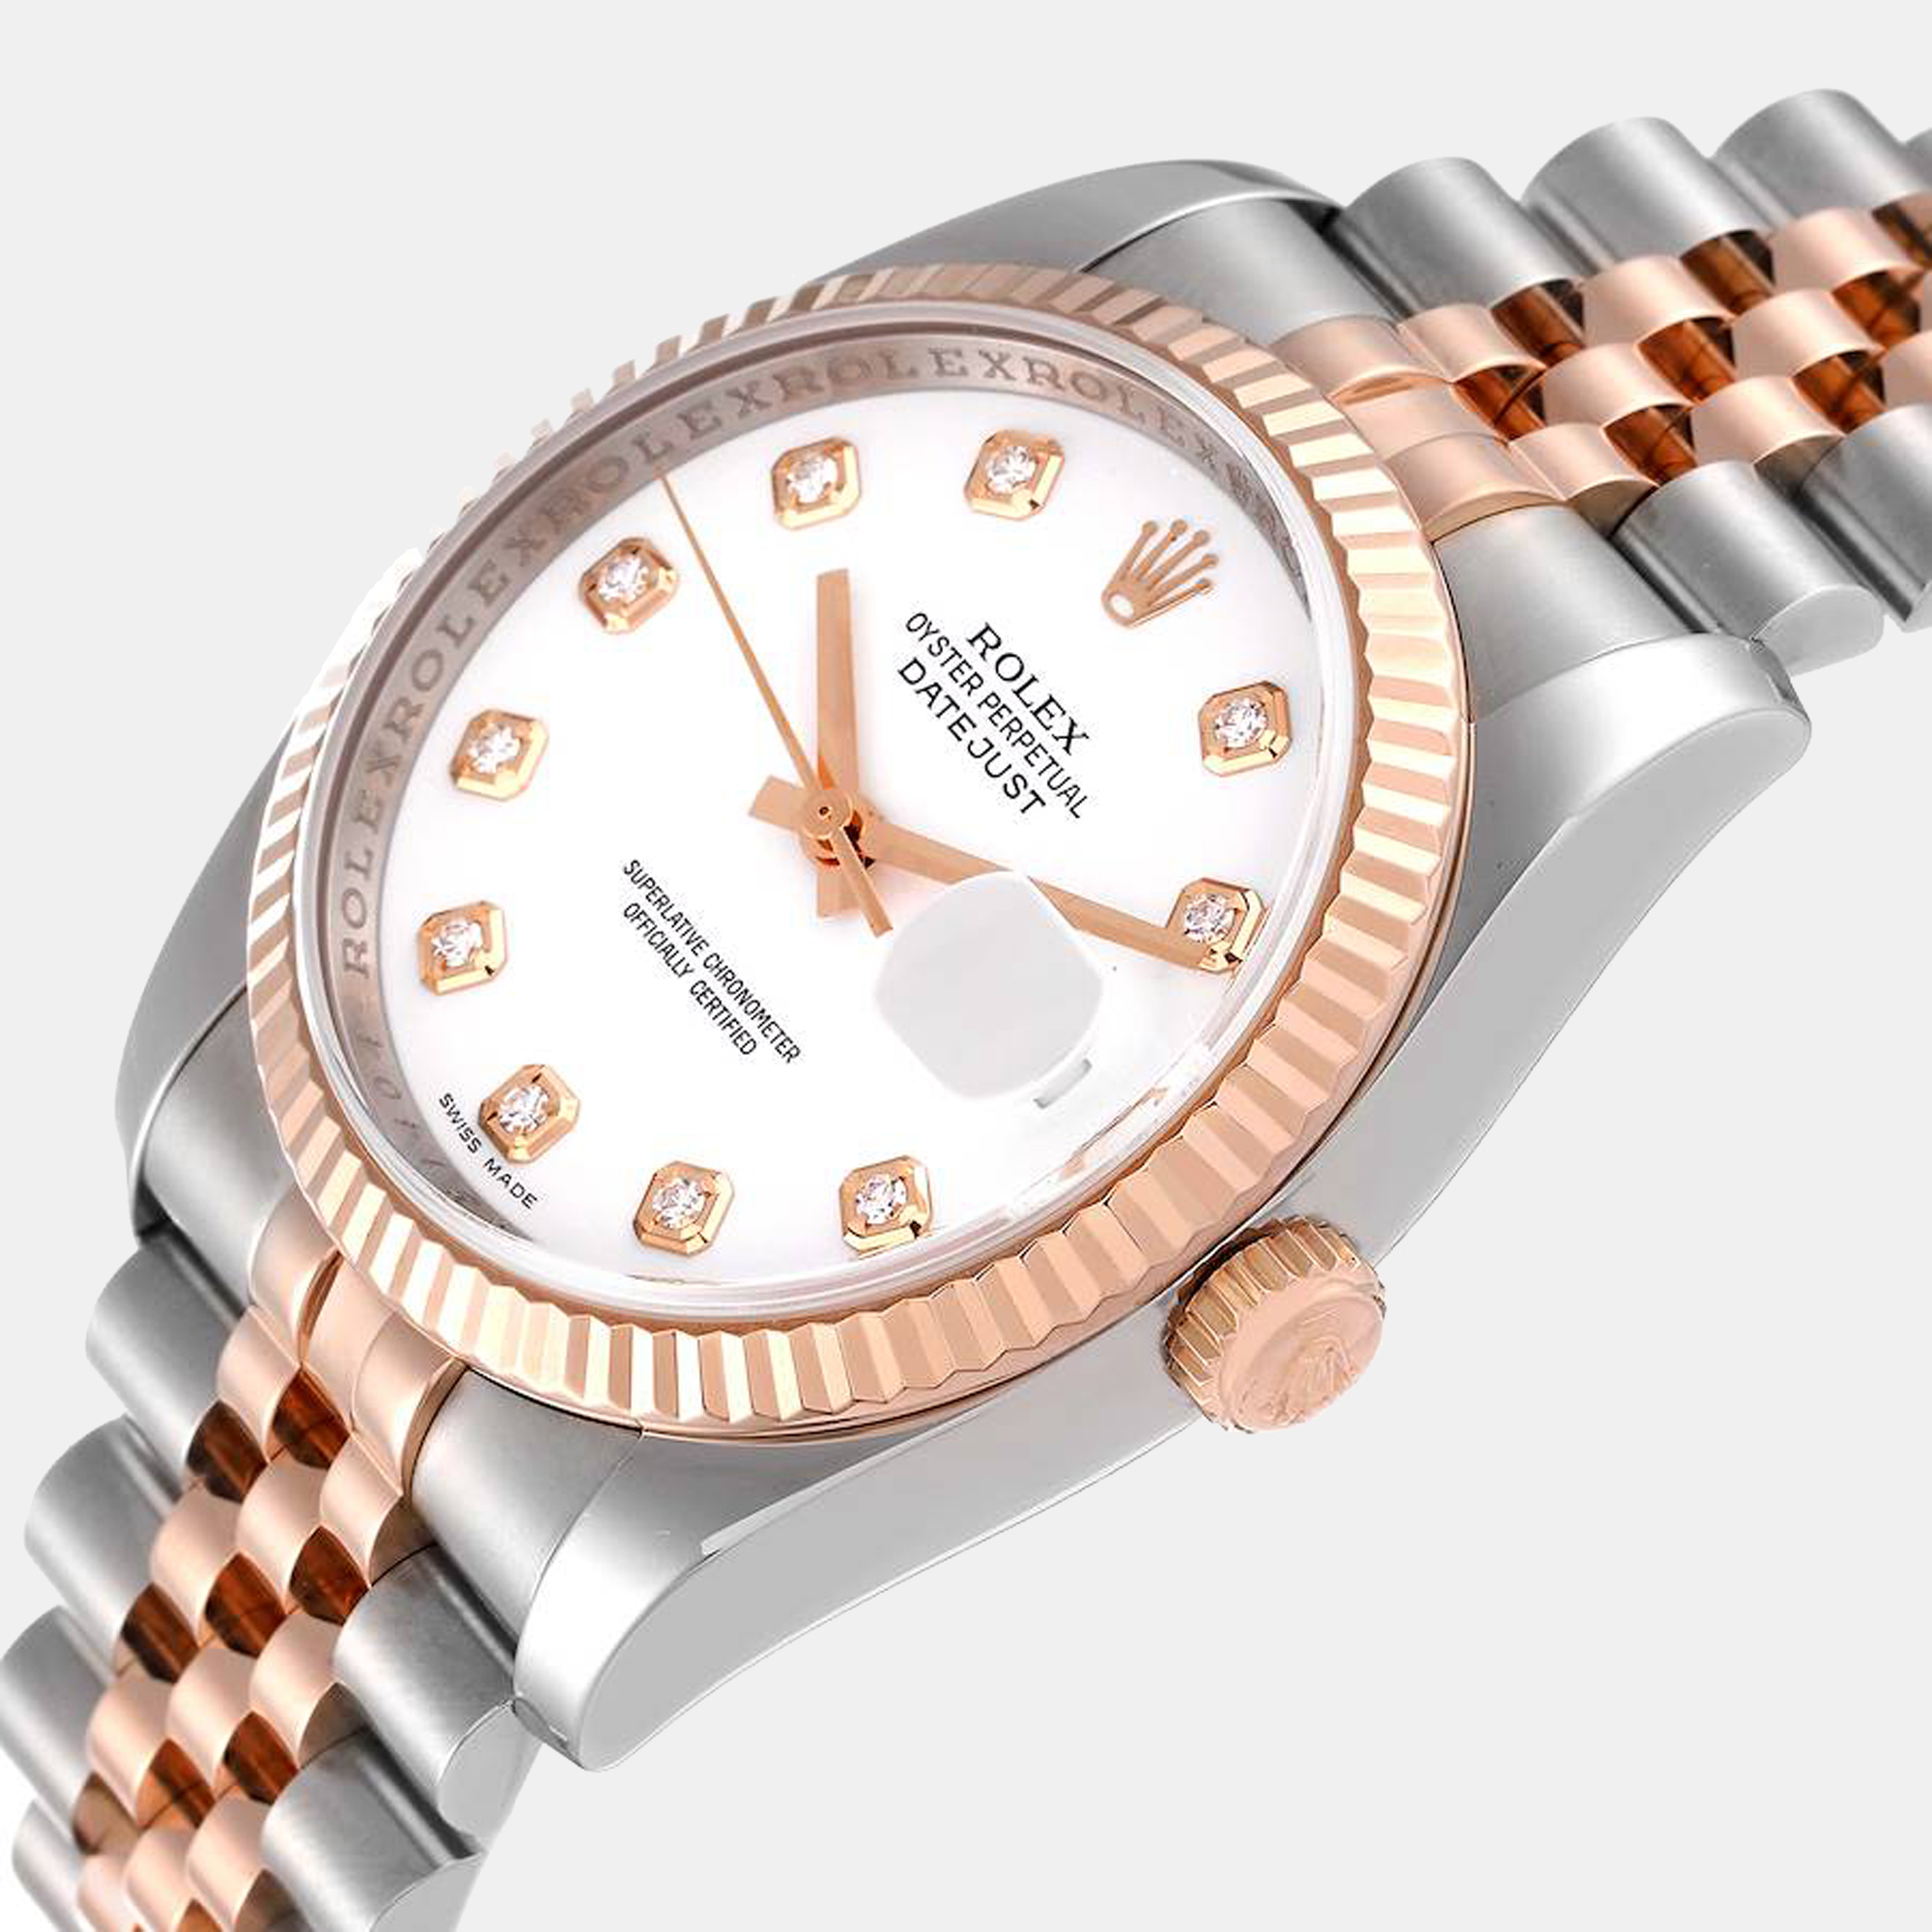 

Rolex White 18K Rose Gold And Stainless Steel Datejust 116231 Men's Wristwatch 36 mm